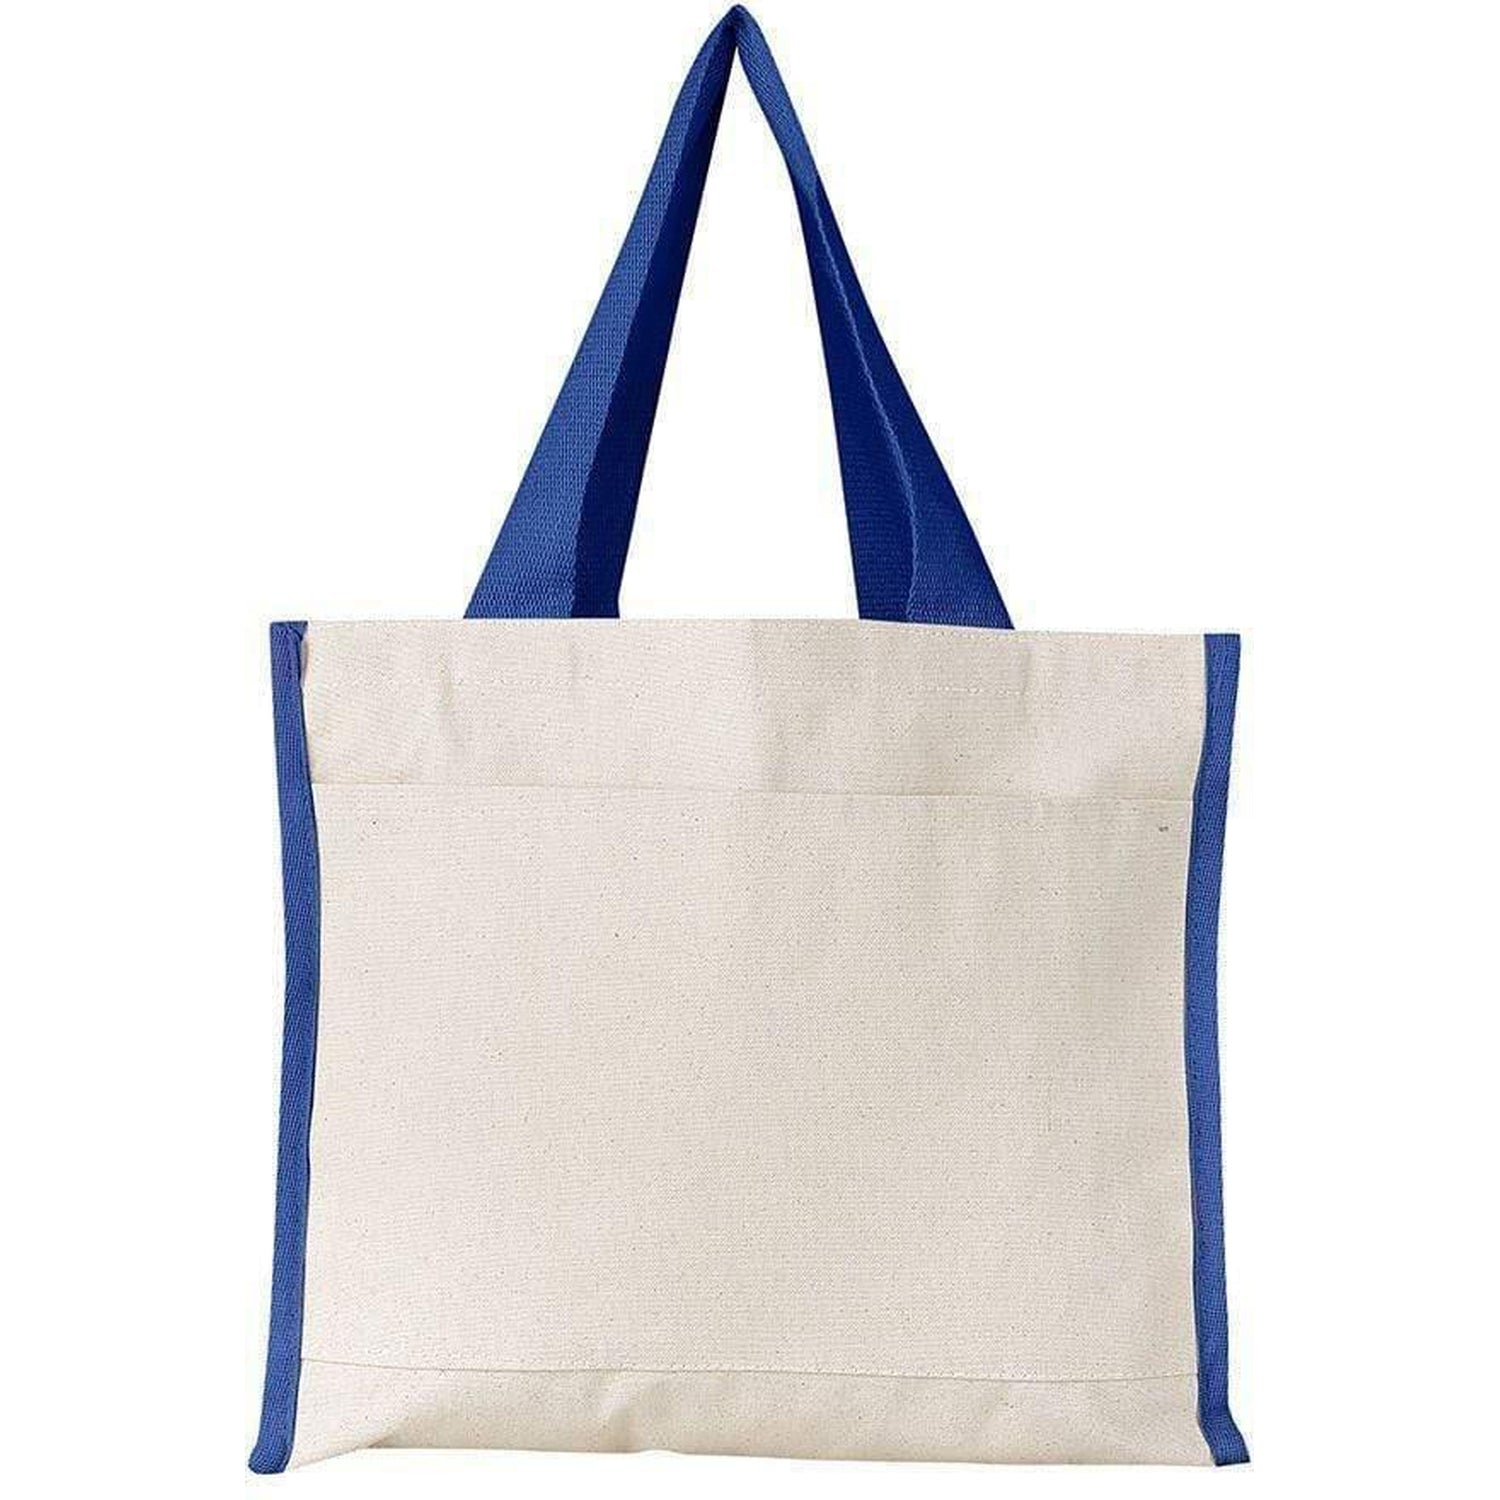 Blank Canvas Tote Bags Wholesale - Medium Size Canvas Tote Bags